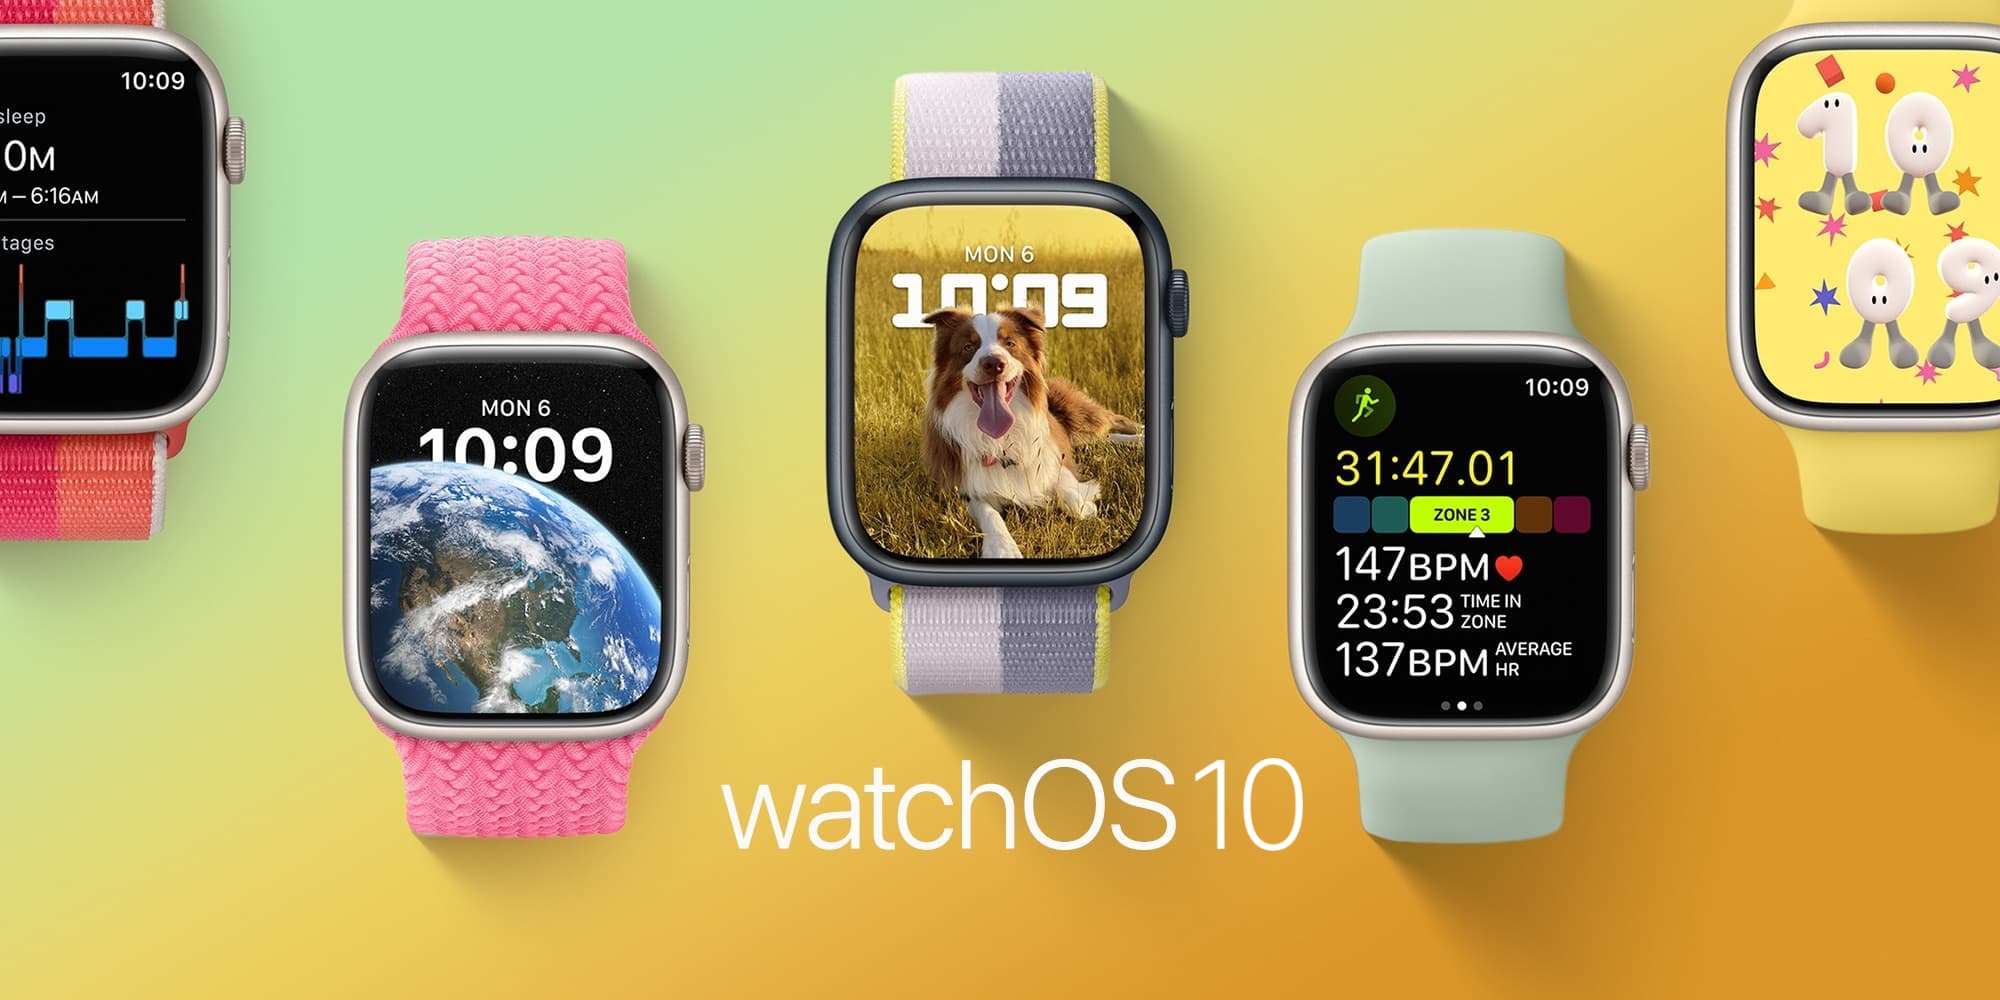 Photo of watchOS 10 will make changes to the interface